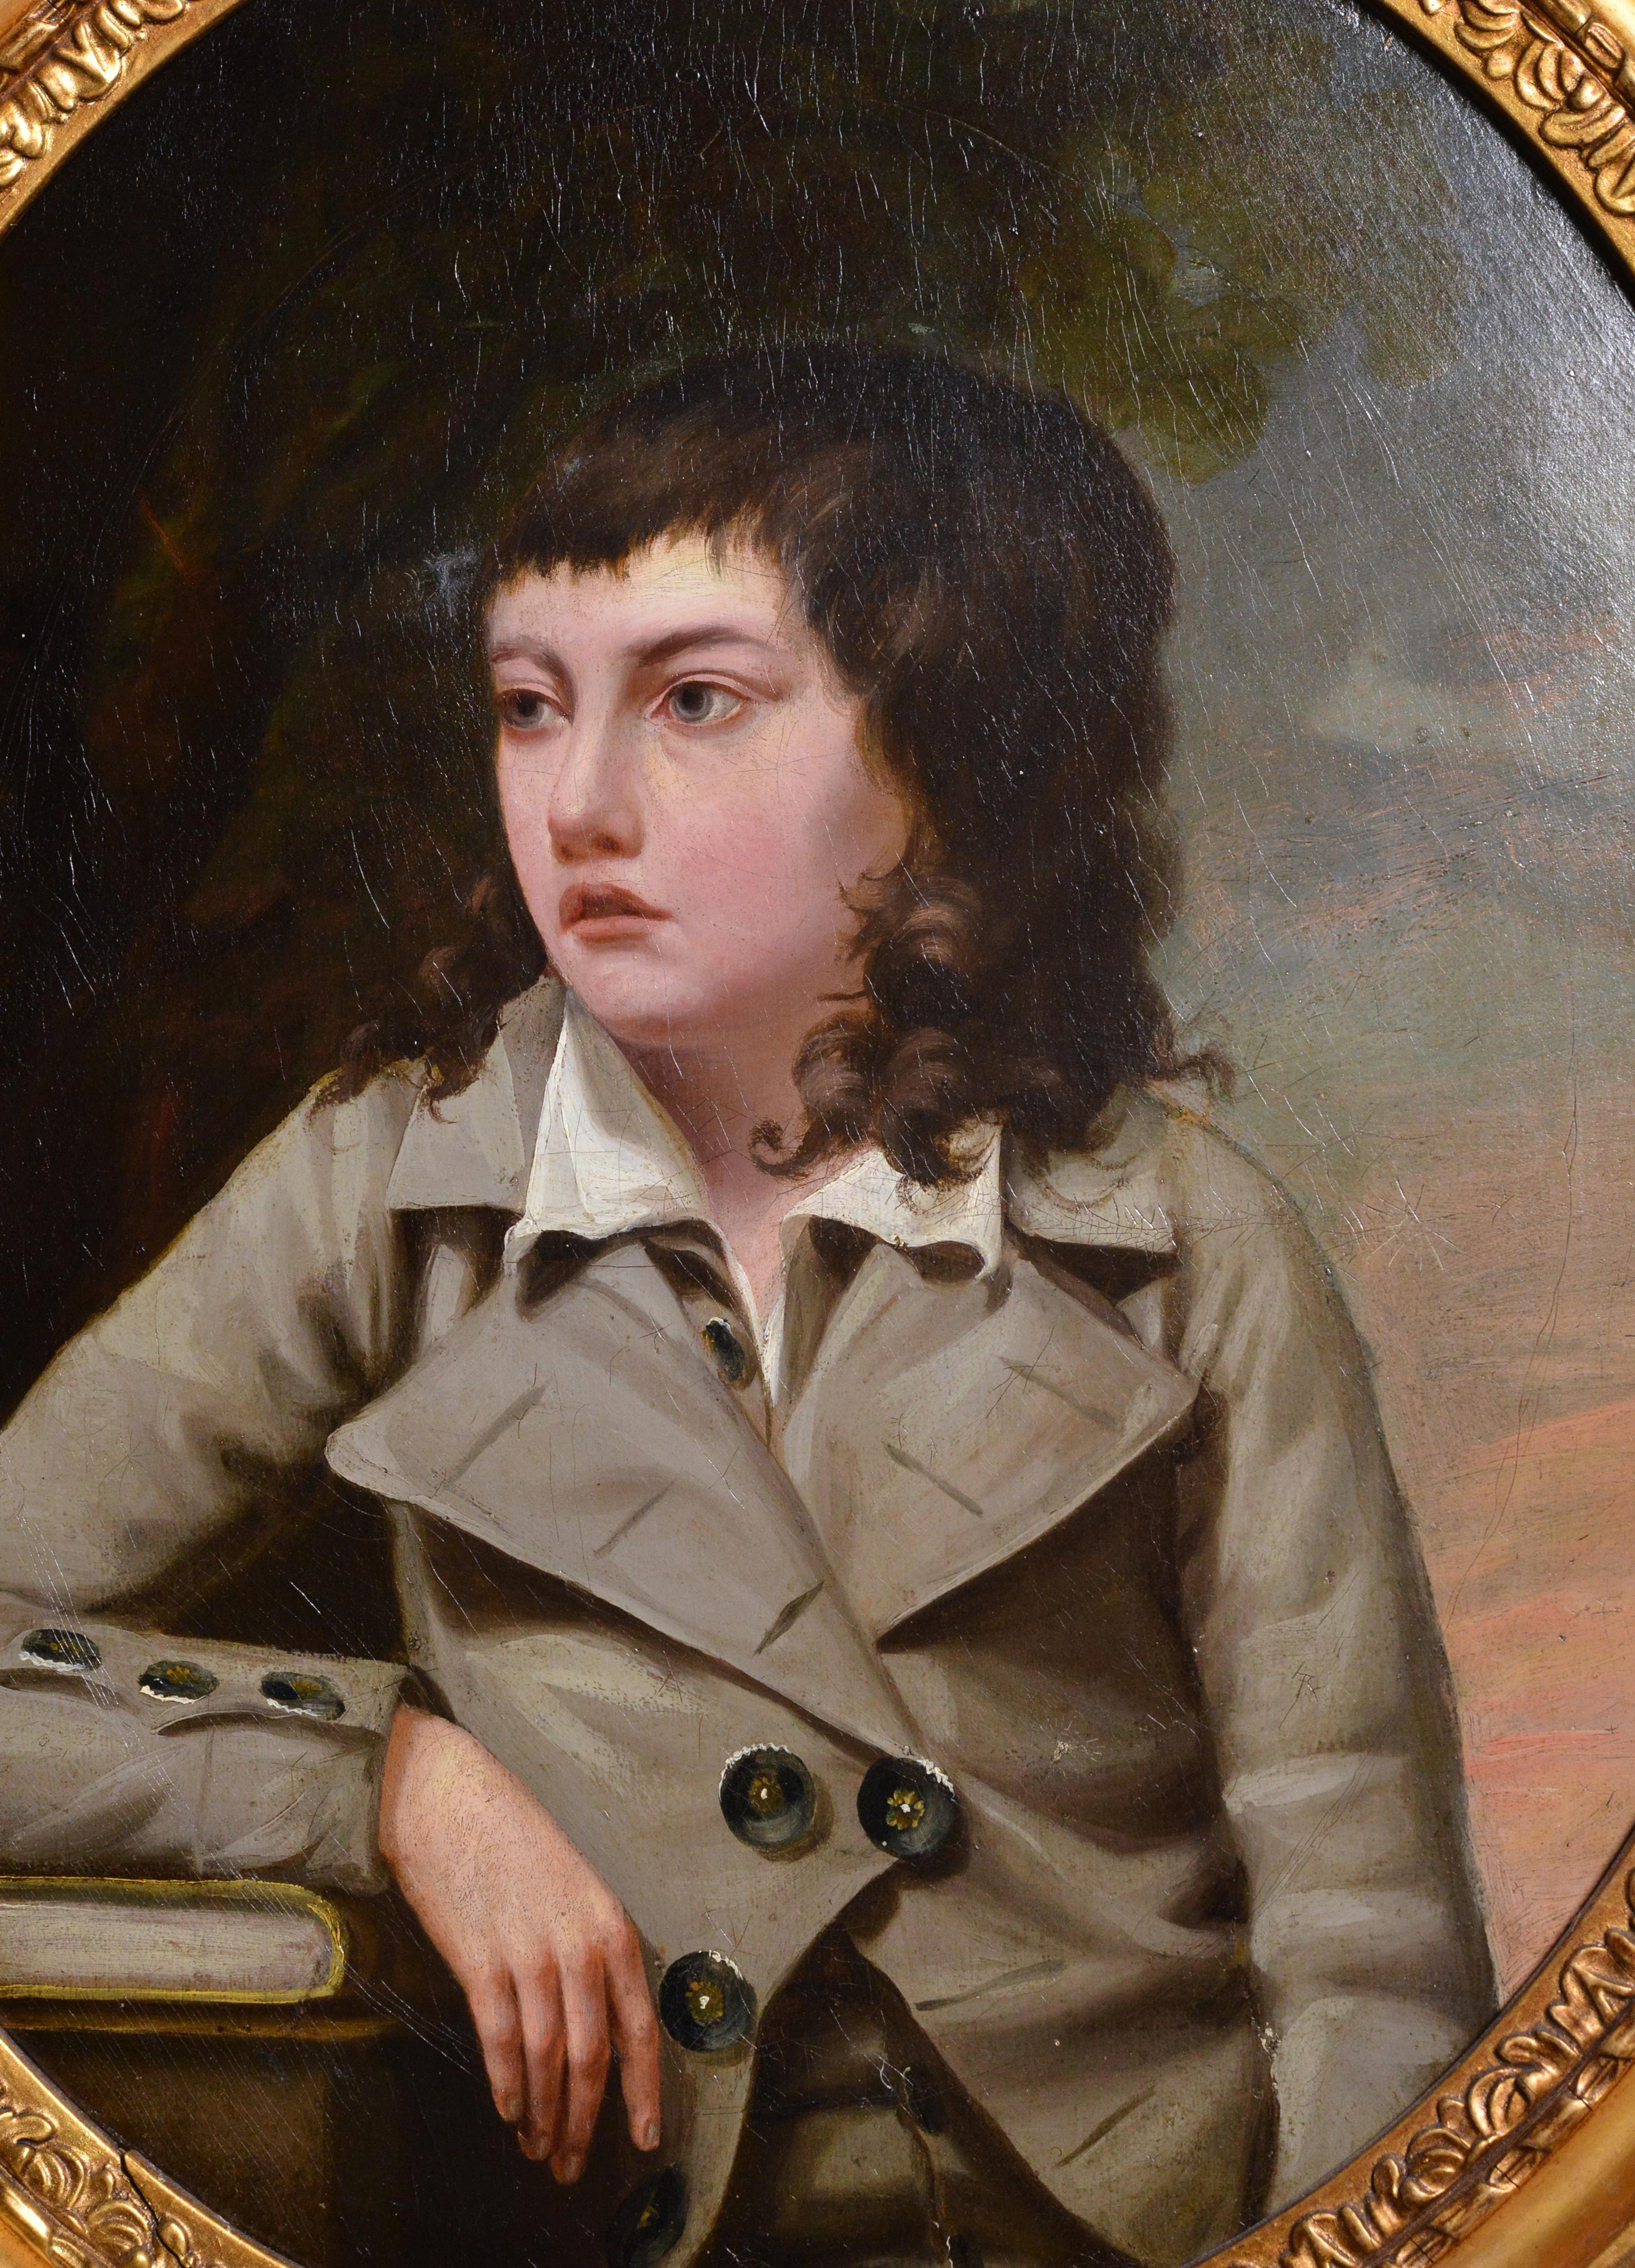 Portrait of boy aged 12-14 painted in late 18th century presumably by RA John Opie, 1761 – 1807 (or his studio, circle), English historical and portrait painter. He painted many great men and women of his day, including members of the British Royal